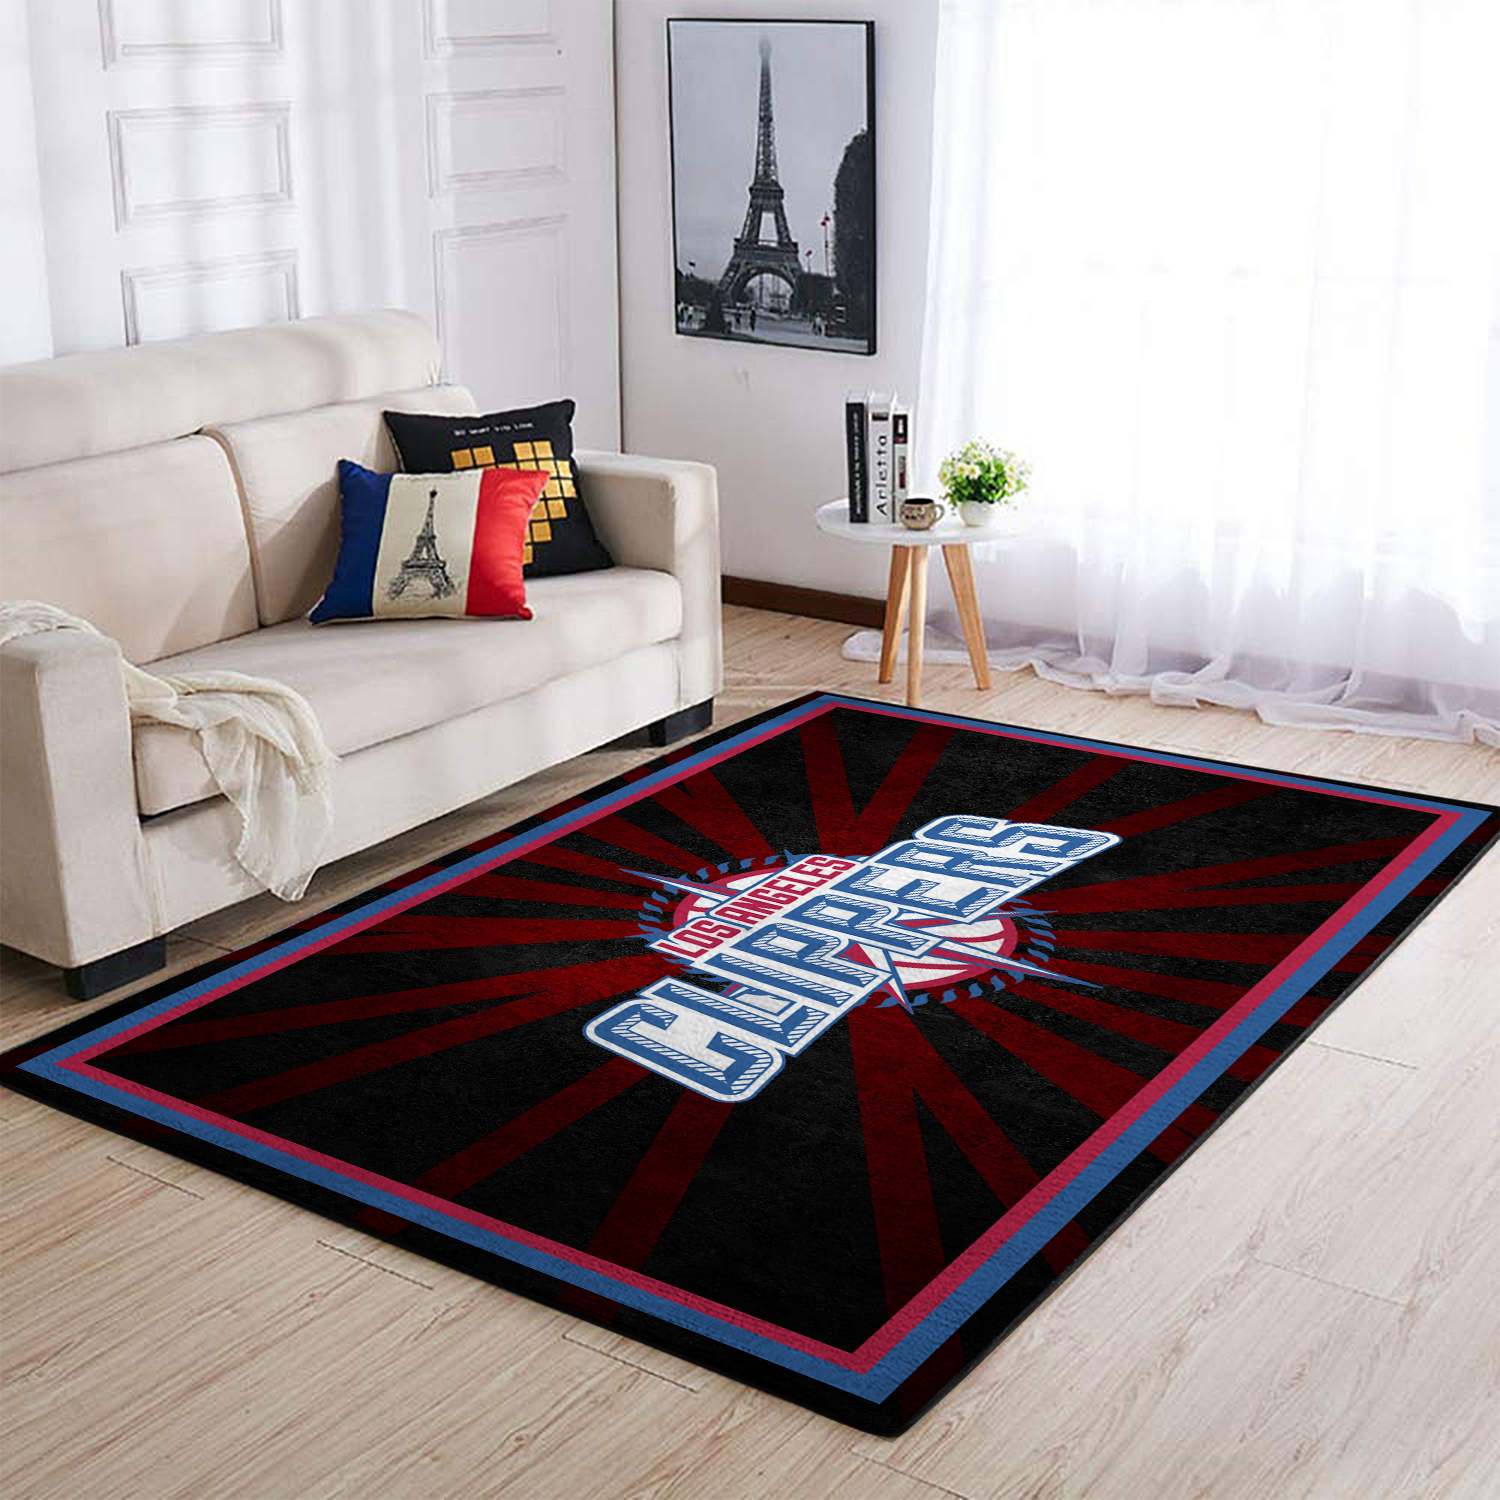 La Clippers Area Rug – Living Room Carpet – Custom Size And Printing